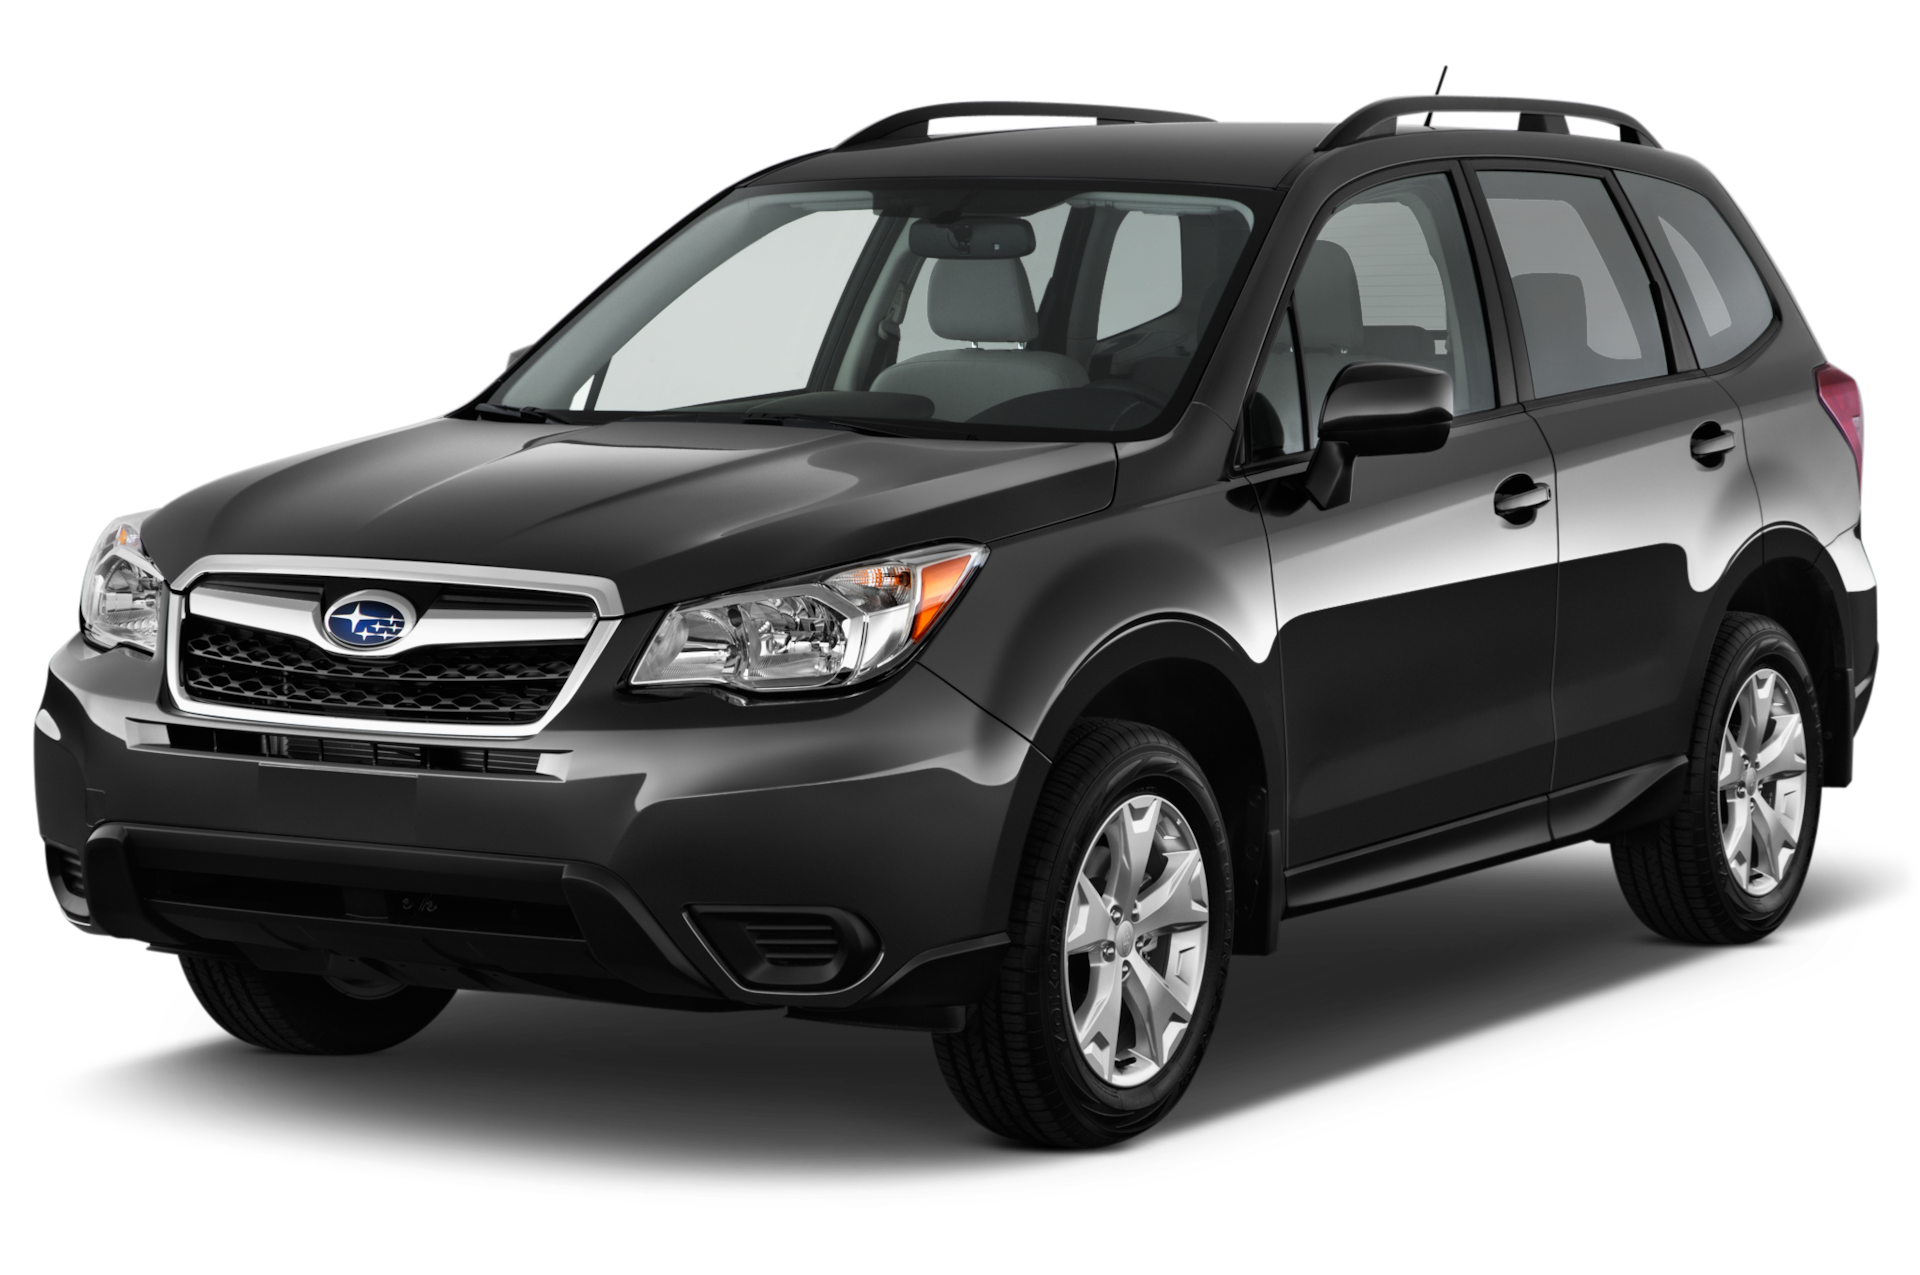 2015 Subaru Forester Prices, Reviews, and Photos - MotorTrend